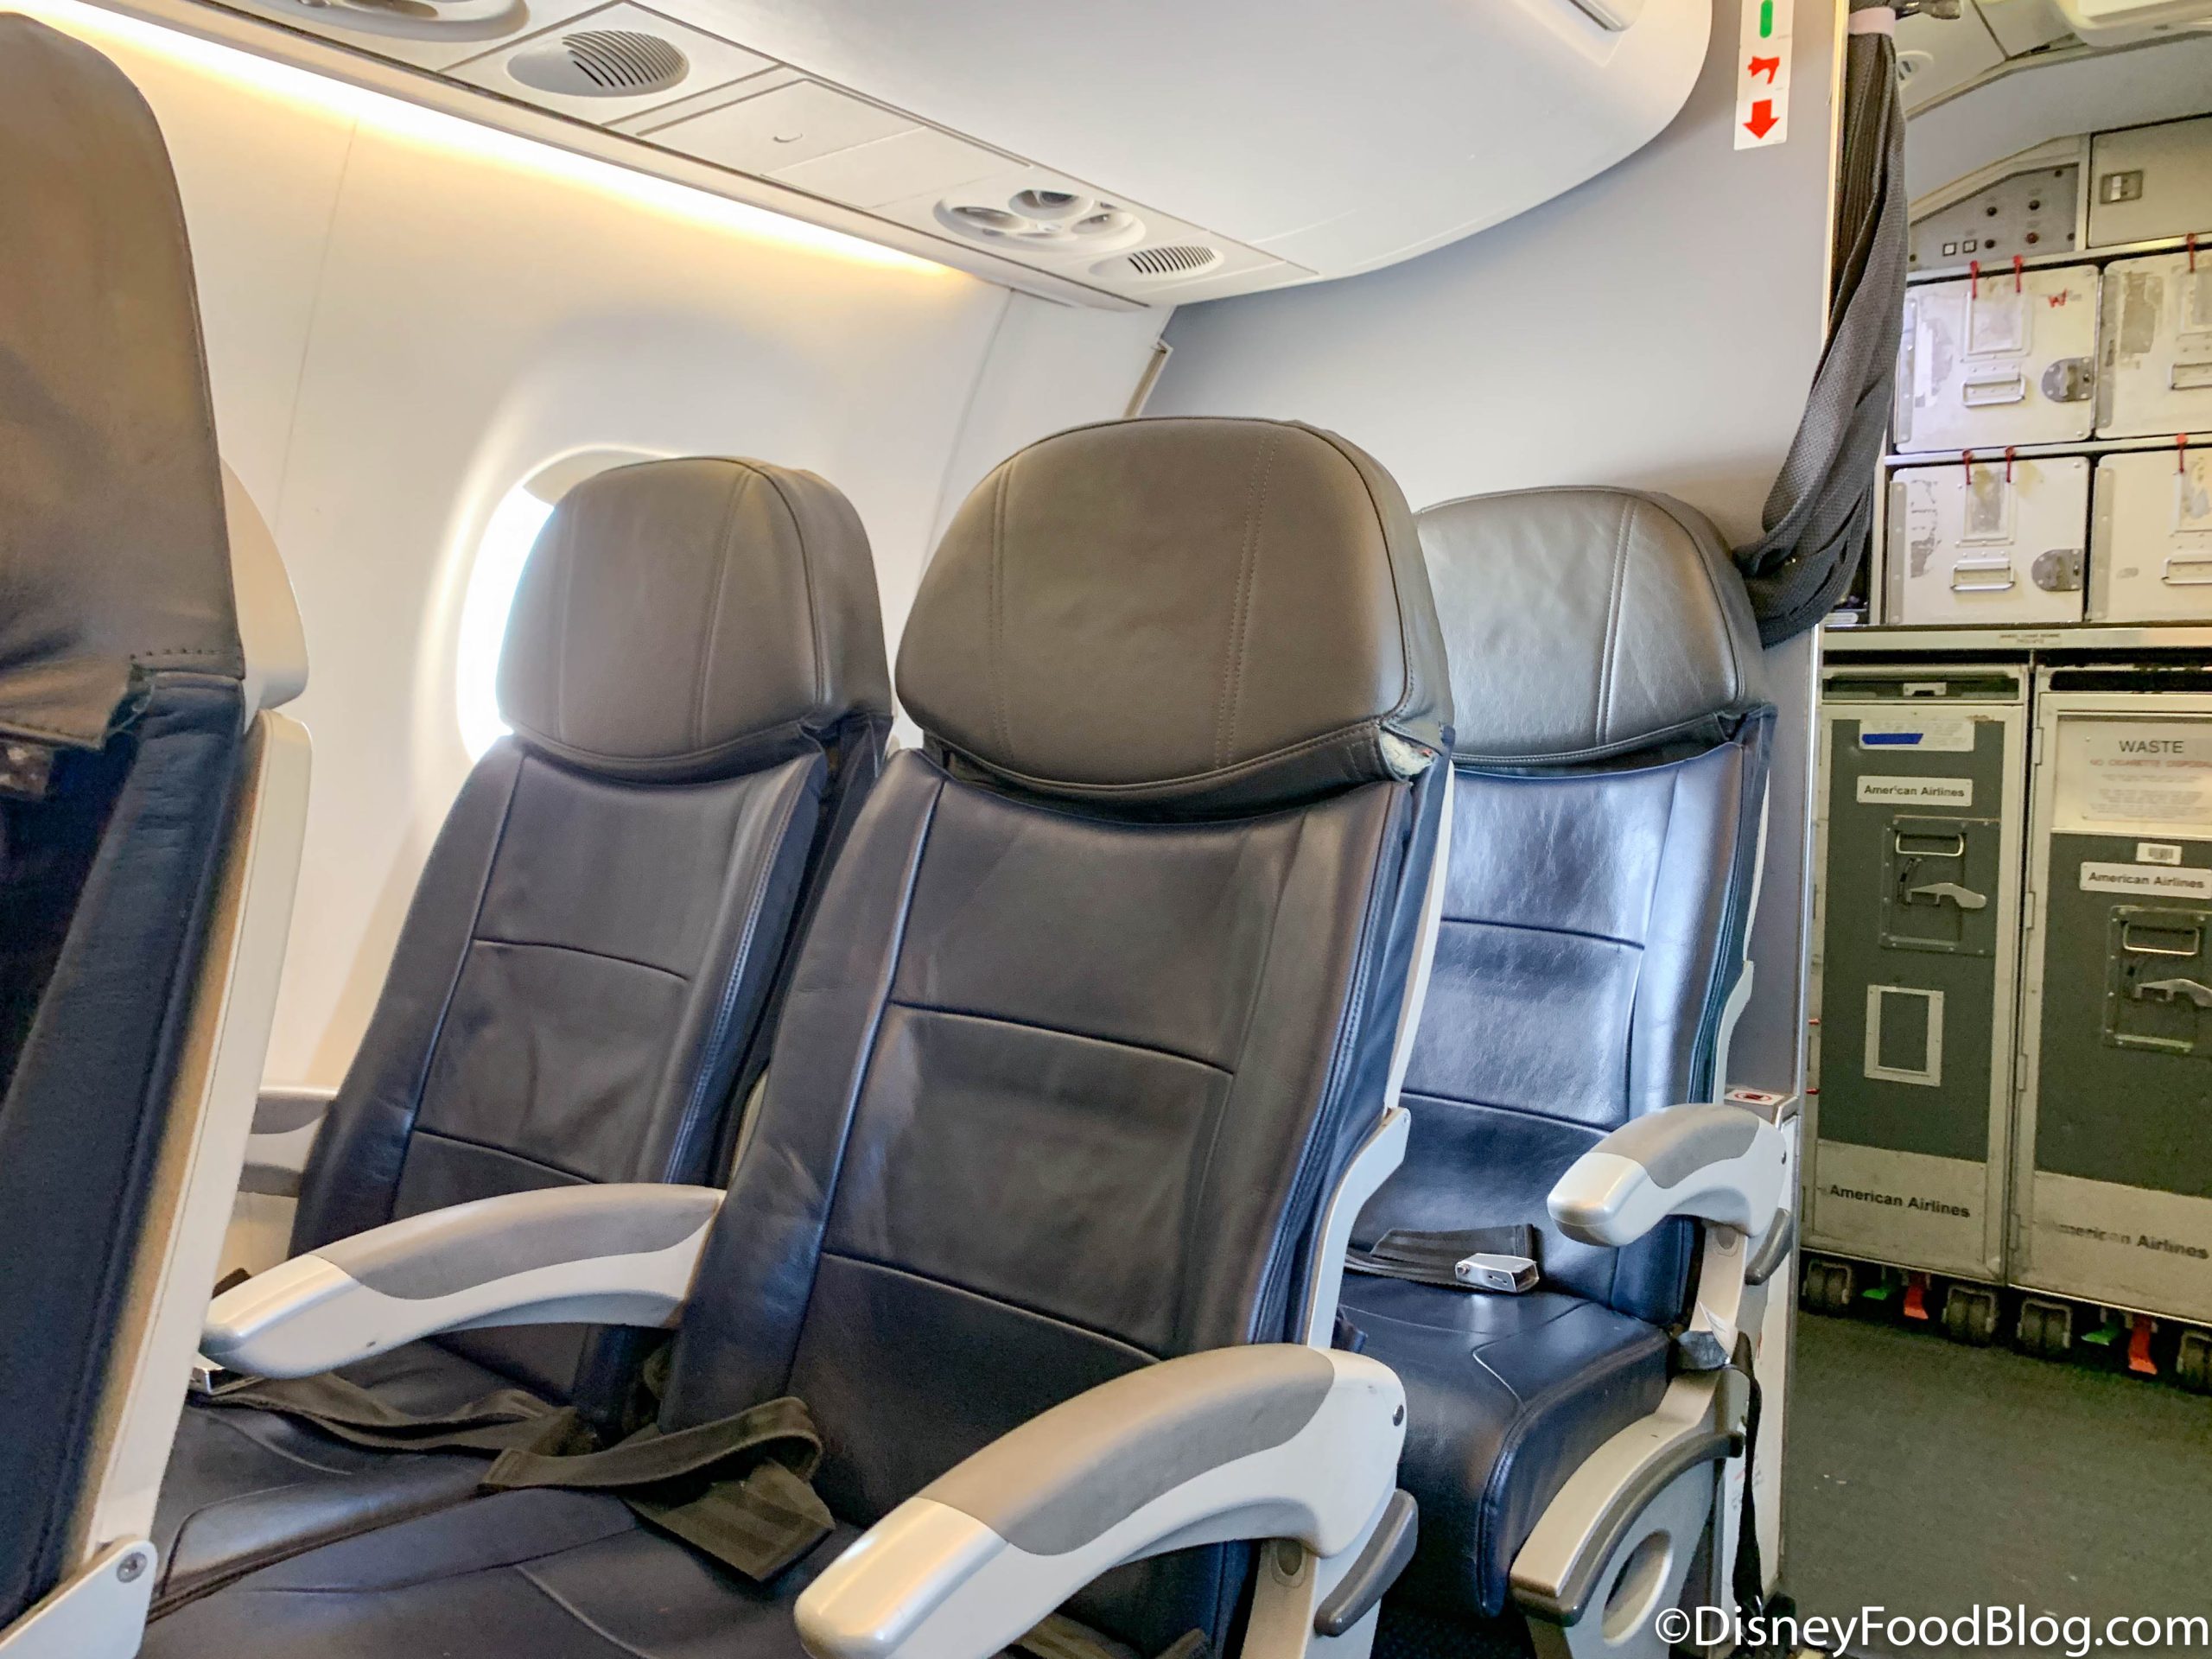 Airplane seat size: FAA wants public's comments on seating dimensions